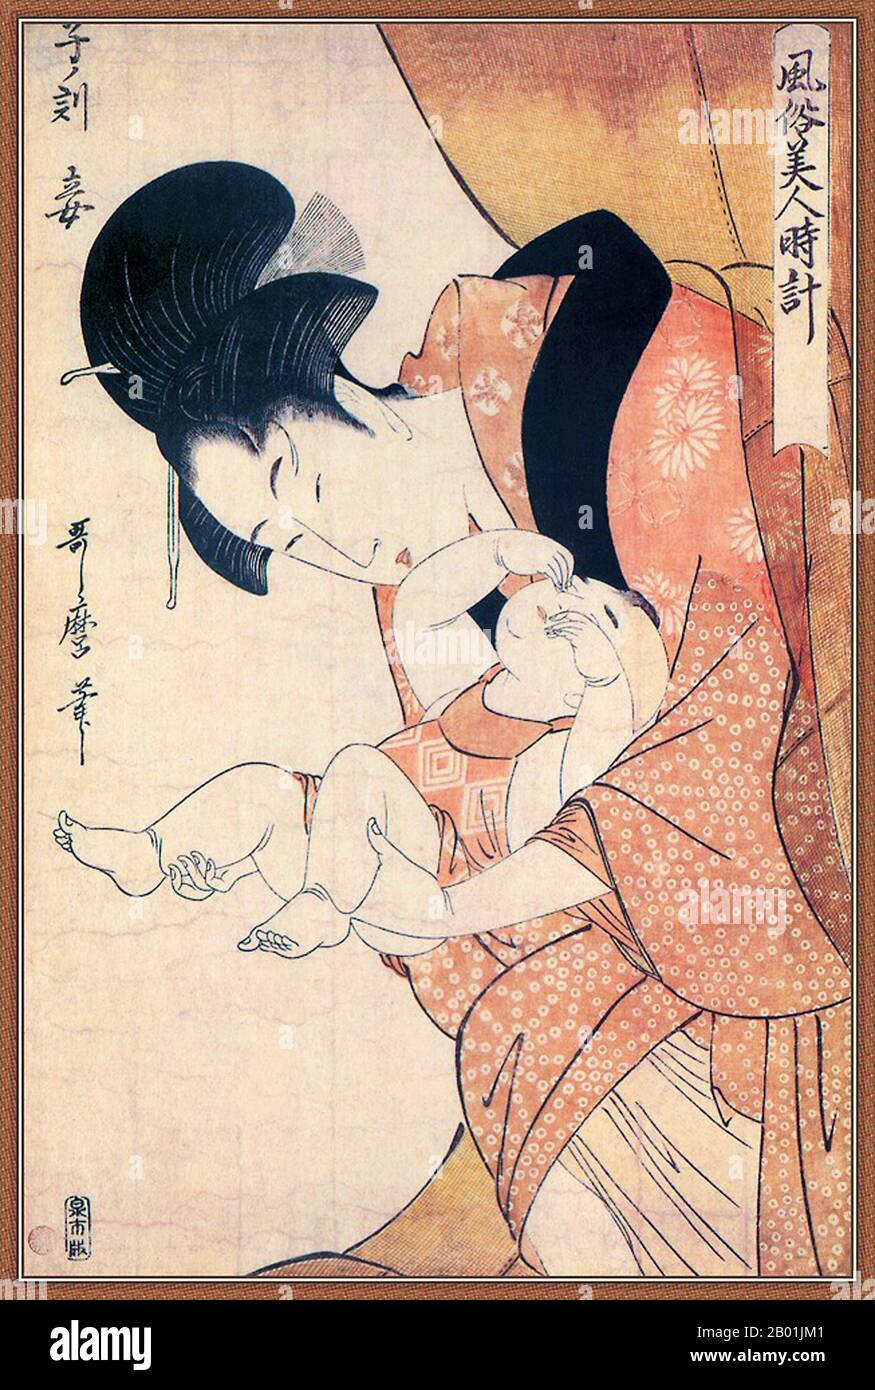 Japan: Midnight - Mother and Sleepy Child. Ukiyo-e woodblock print by Kitagawa Utamaro (c. 1753 - 31 October 1806), 1790.  Kitagawa Utamaro was a Japanese printmaker and painter, who is considered one of the greatest artists of woodblock prints (ukiyo-e). He is known especially for his masterfully composed studies of women, known as bijinga. He also produced nature studies, particularly illustrated books of insects. Stock Photo